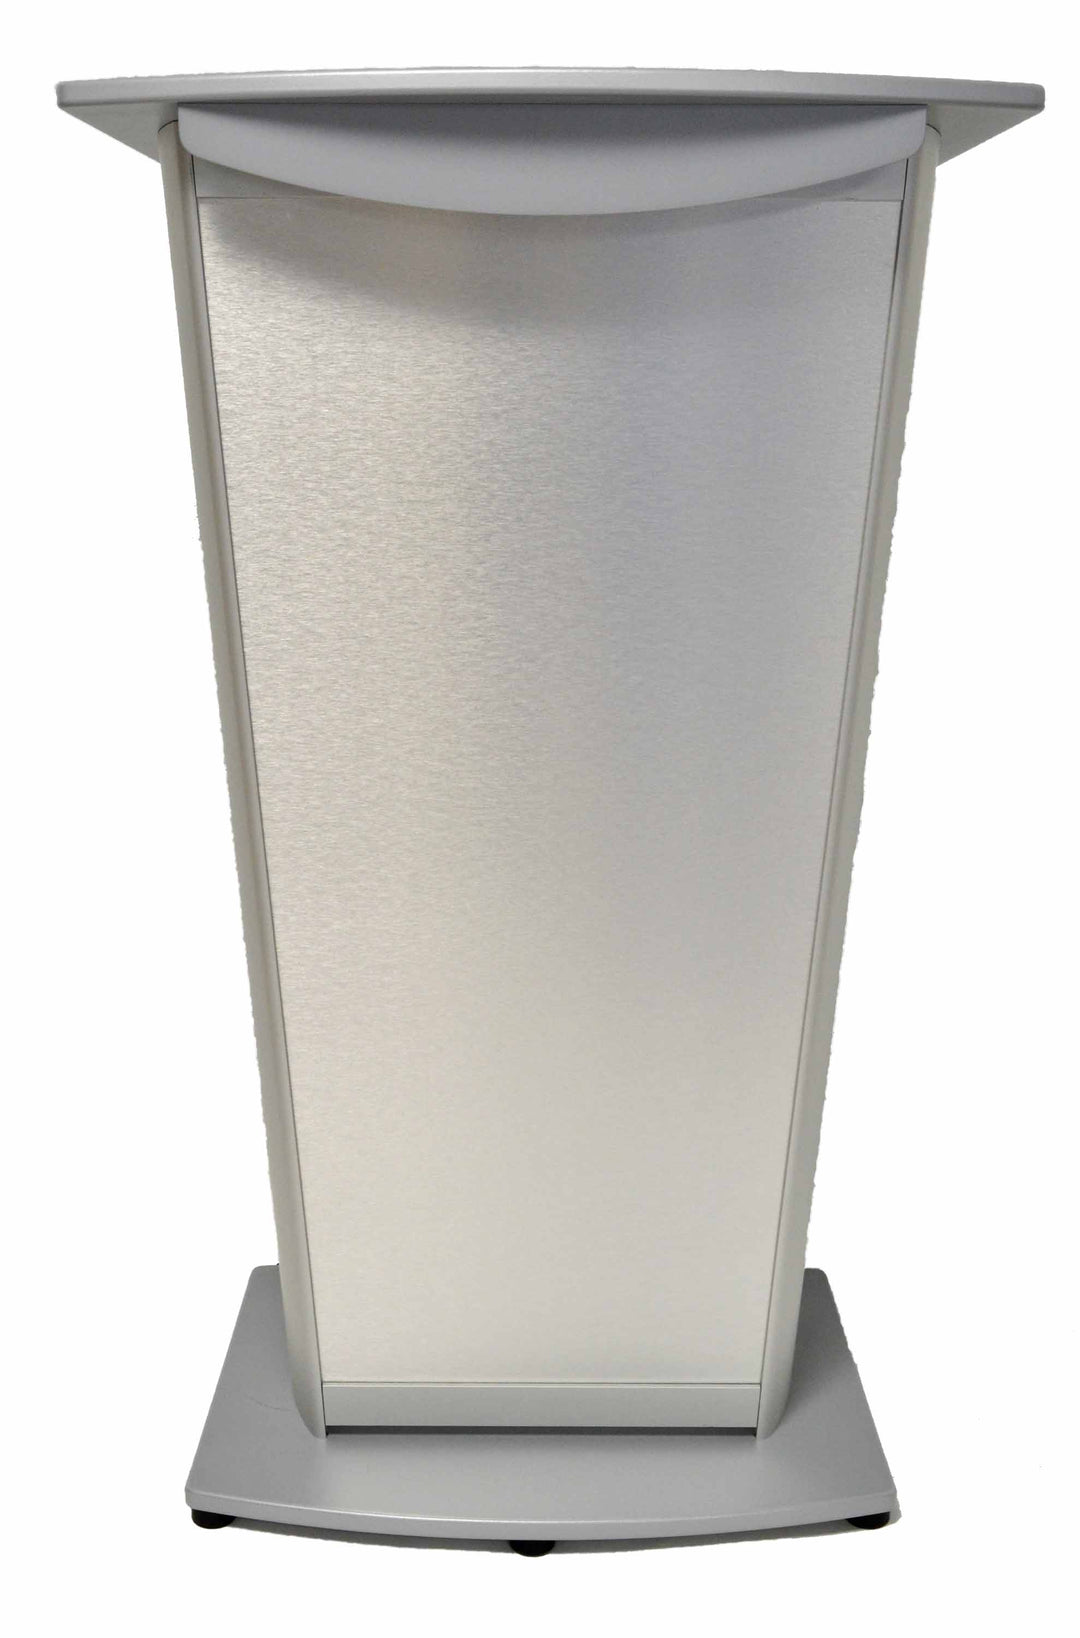 Contemporary Lecterns and Podium VH1 Standard Aluminum Lectern-Front-Contemporary Lecterns and Podiums-Podiums Direct